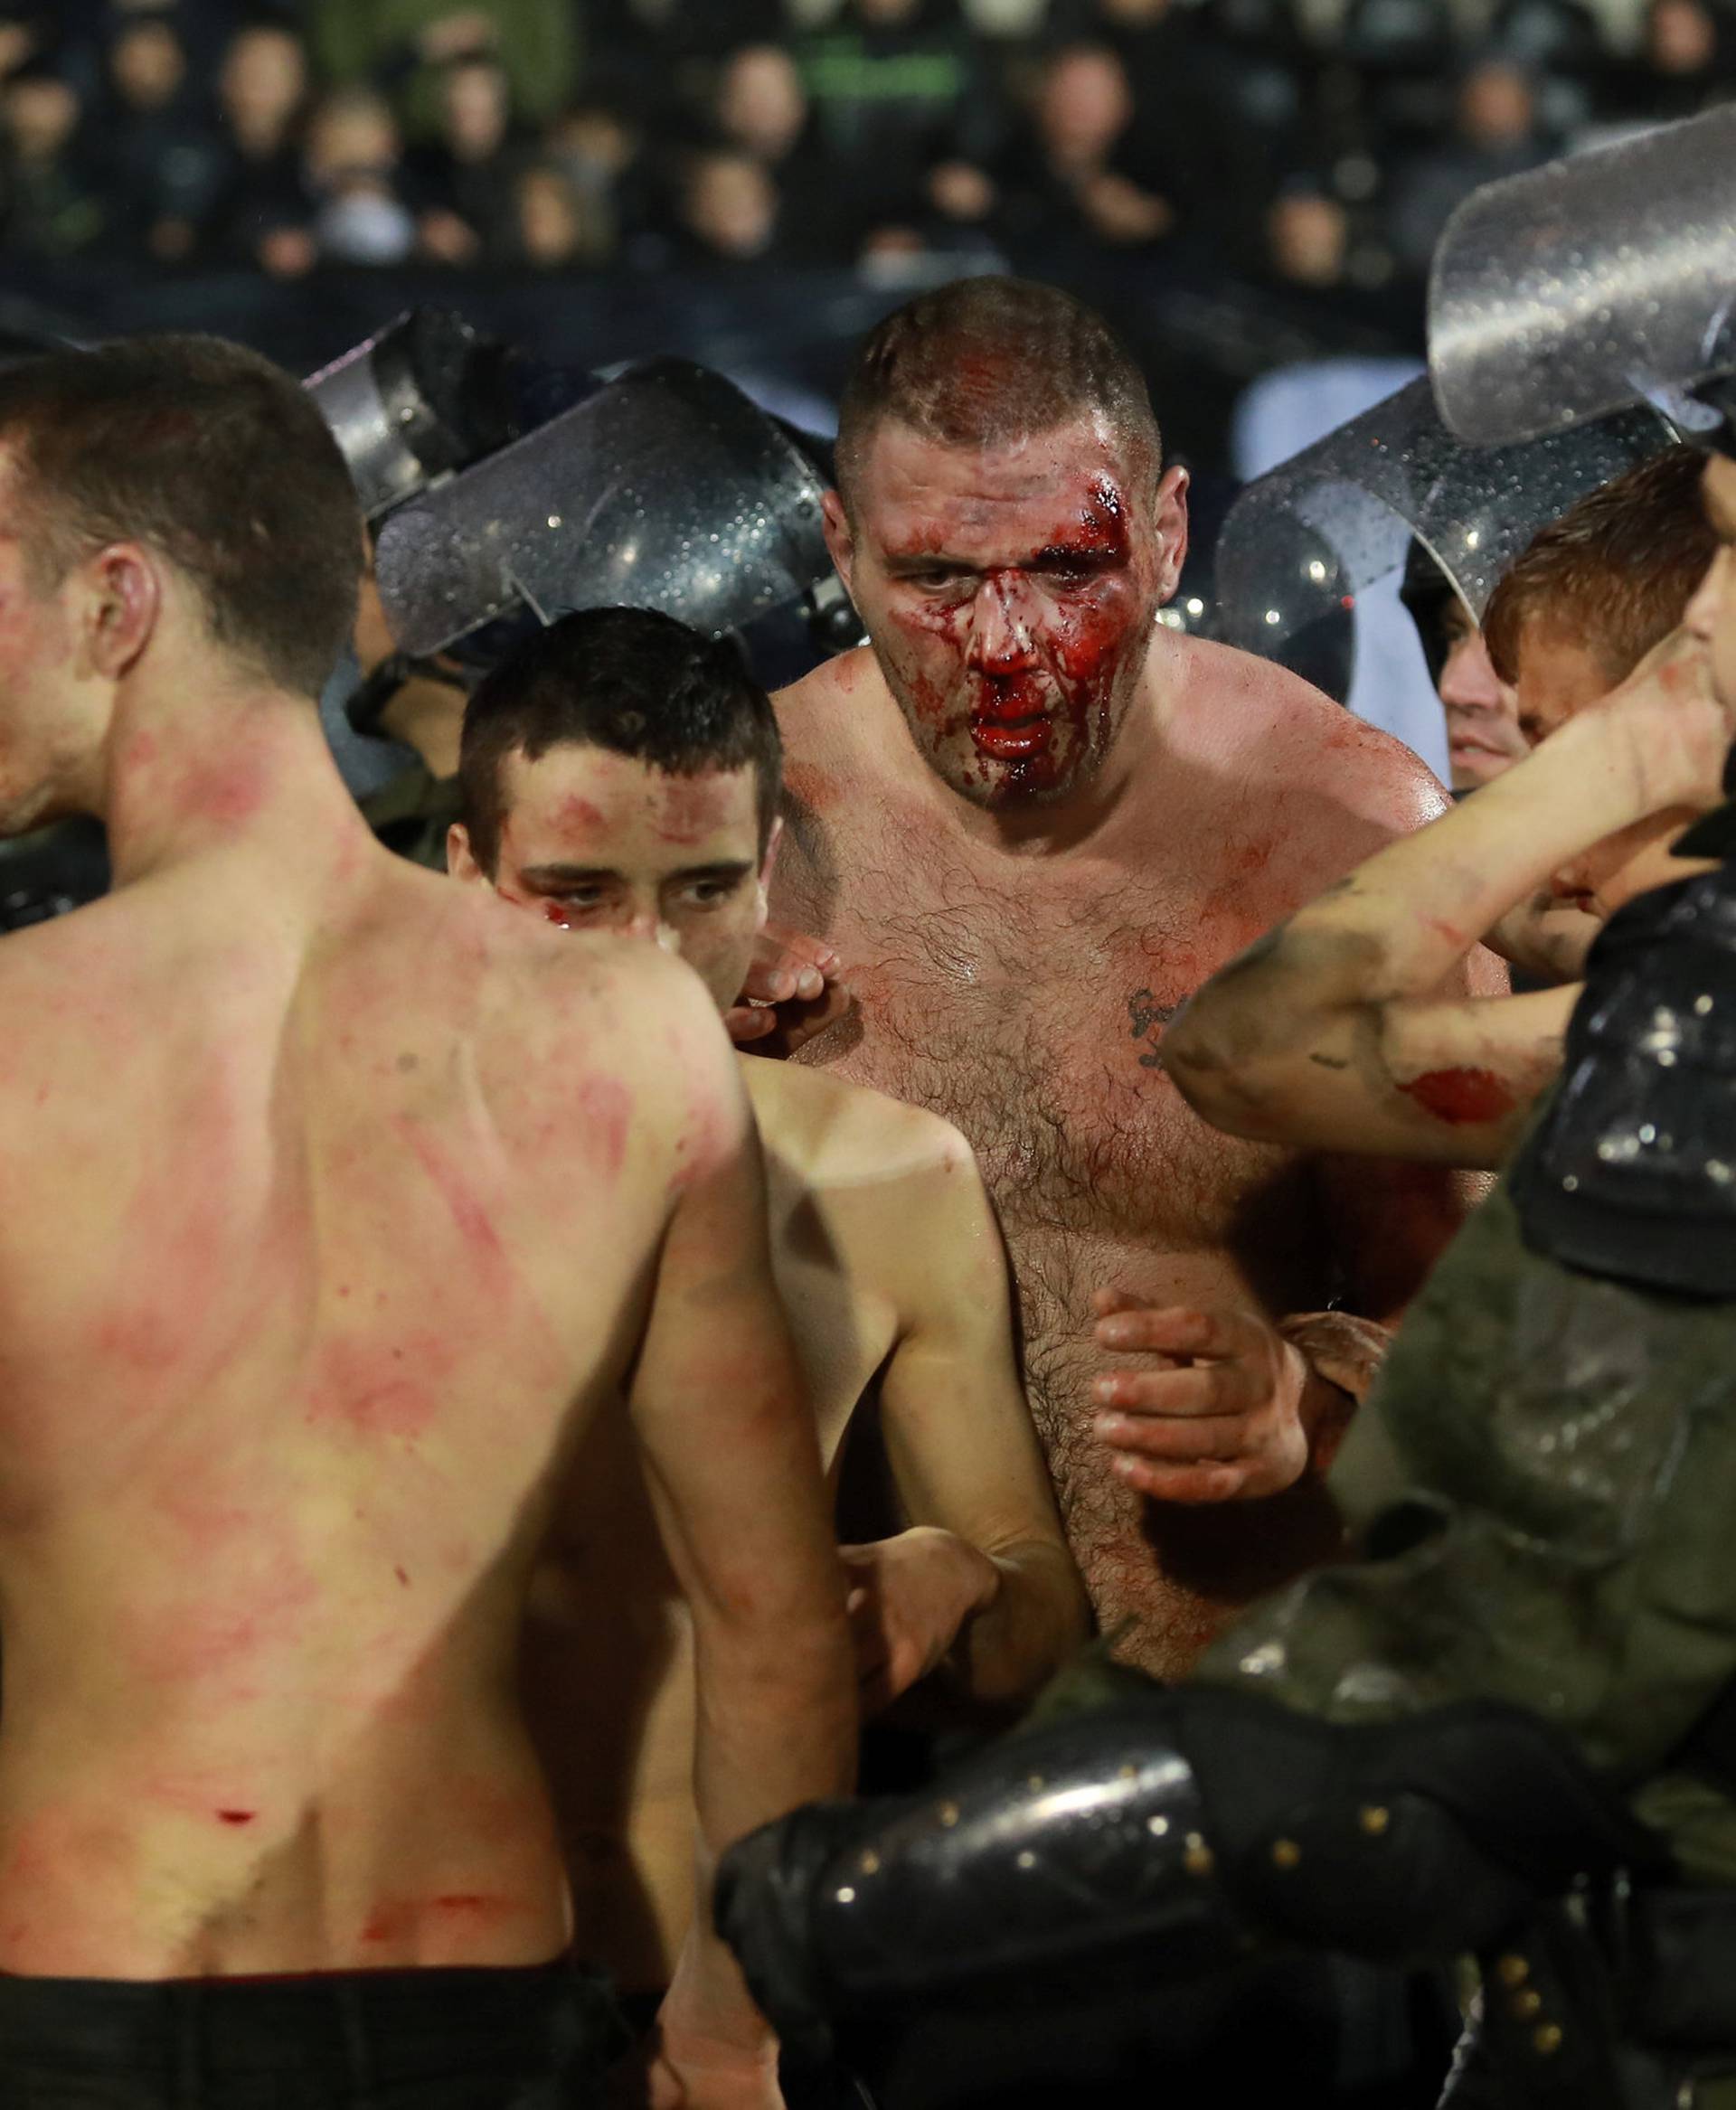 Police escort the soccer fans injured during the fights at a match between Red Star and Partizan in Belgrade